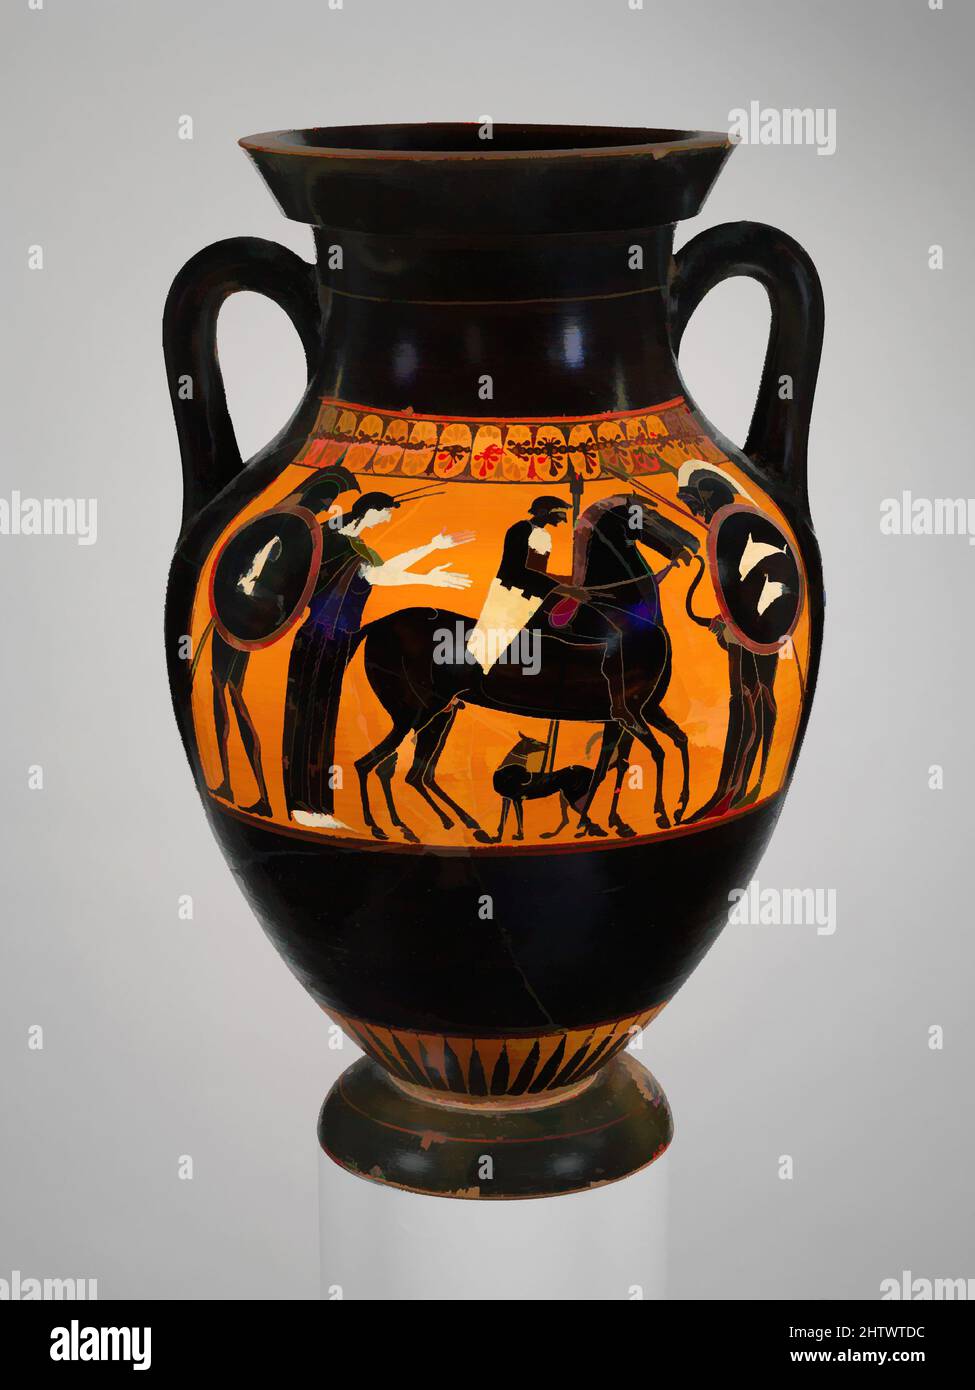 Art inspired by Terracotta amphora (jar), Archaic, ca. 520 B.C., Greek, Attic, Terracotta; black-figure, H. 21 5/16 in. (54.2 cm), Vases, Obverse, Athena mounting chariot, with Herakles and gods, Reverse, warriors' departure. The scene on the reverse is interesting for the way in which, Classic works modernized by Artotop with a splash of modernity. Shapes, color and value, eye-catching visual impact on art. Emotions through freedom of artworks in a contemporary way. A timeless message pursuing a wildly creative new direction. Artists turning to the digital medium and creating the Artotop NFT Stock Photo